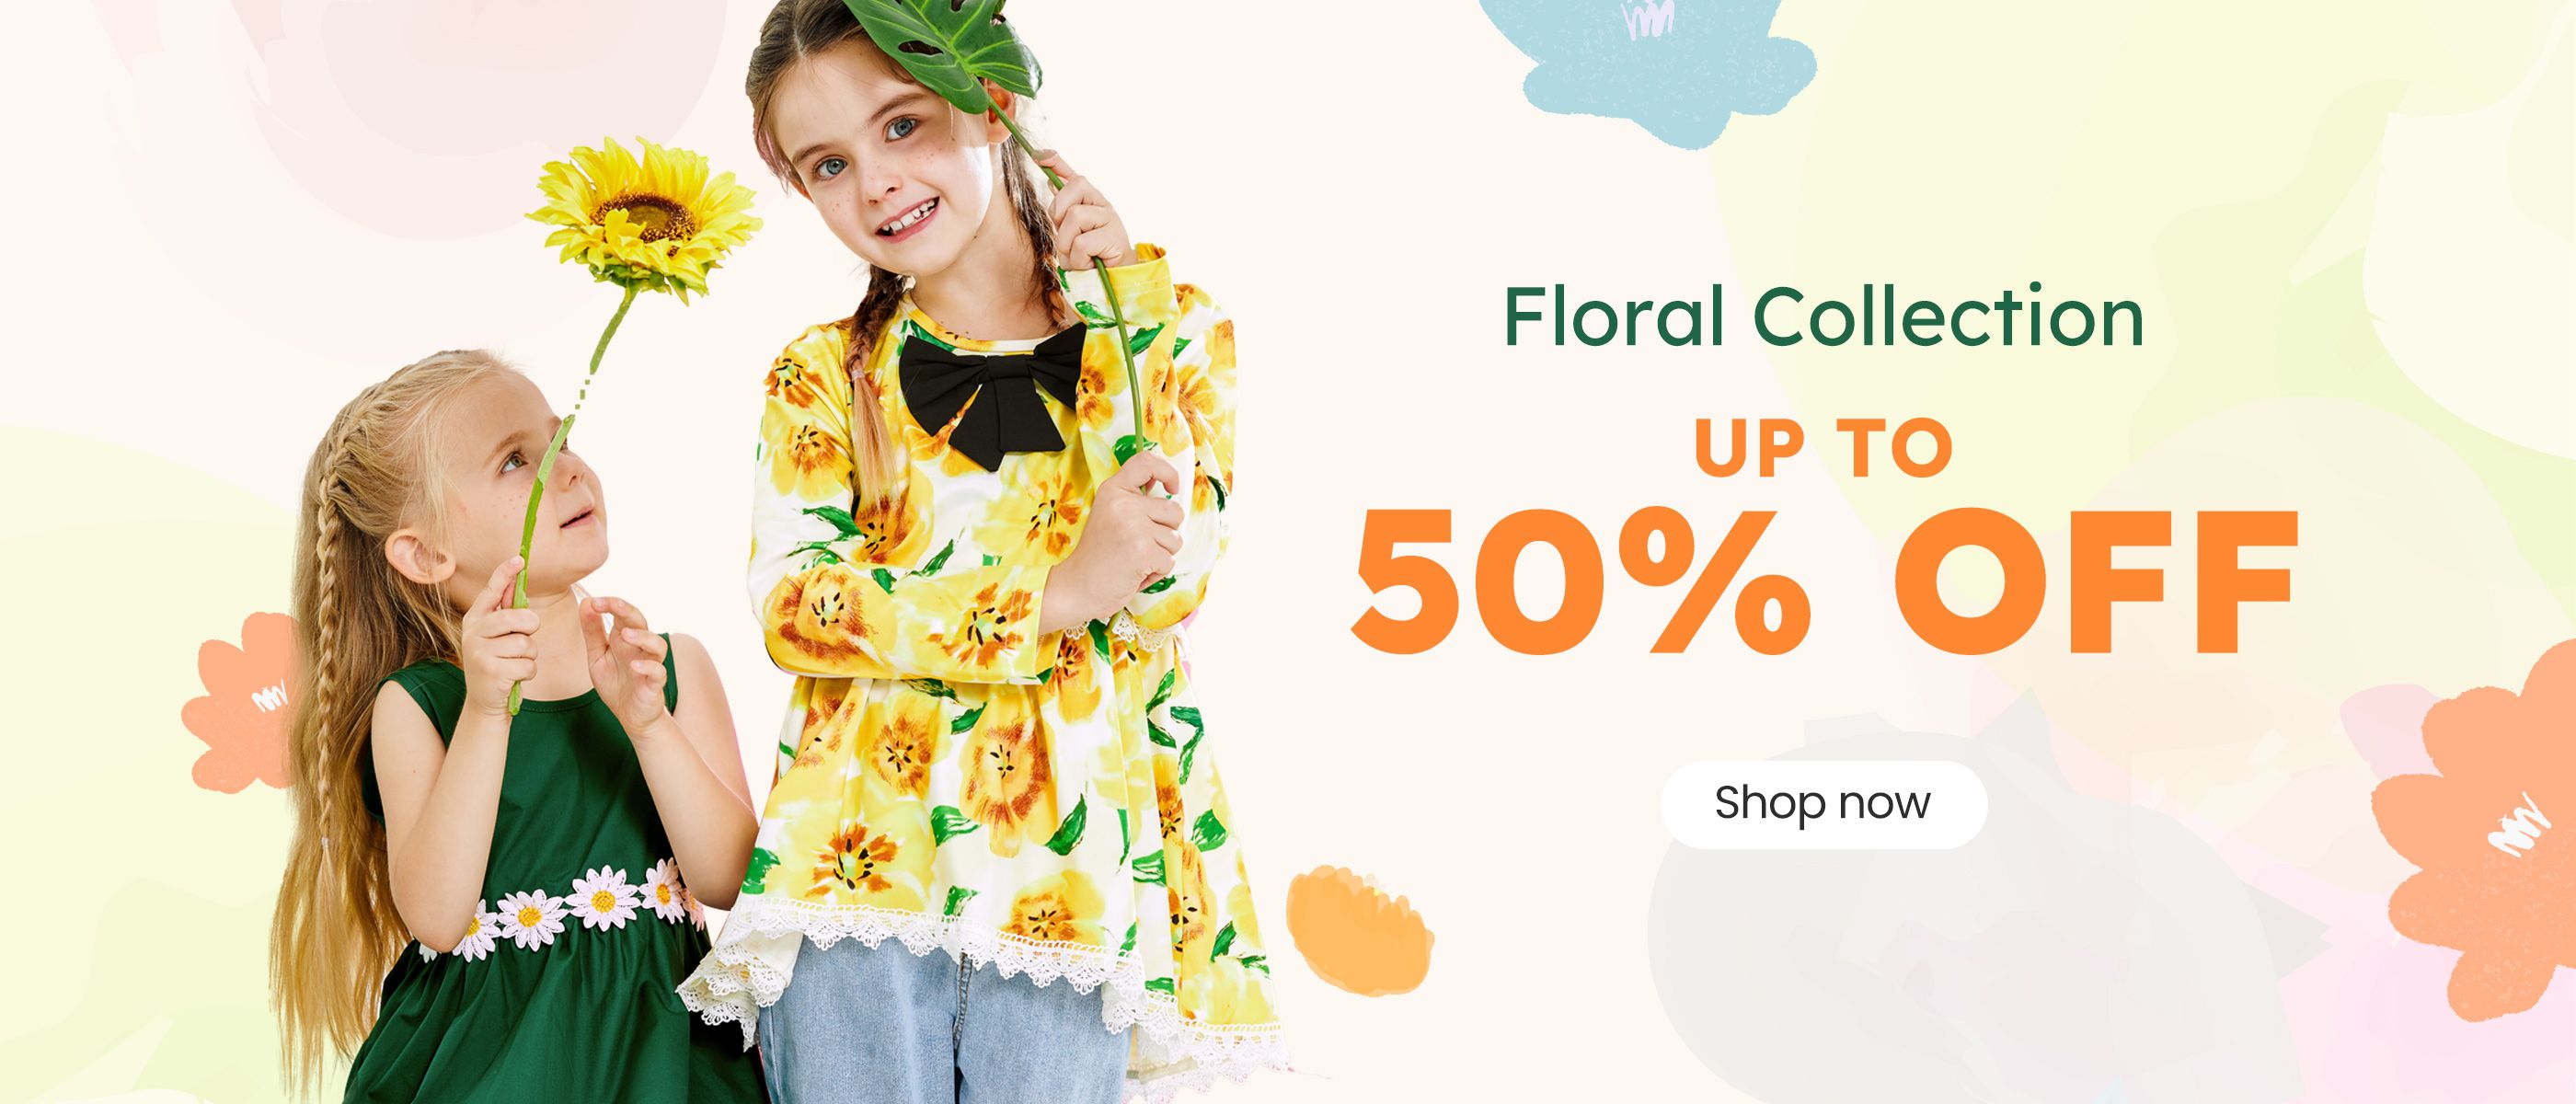 Click it to join Floral Collection activity